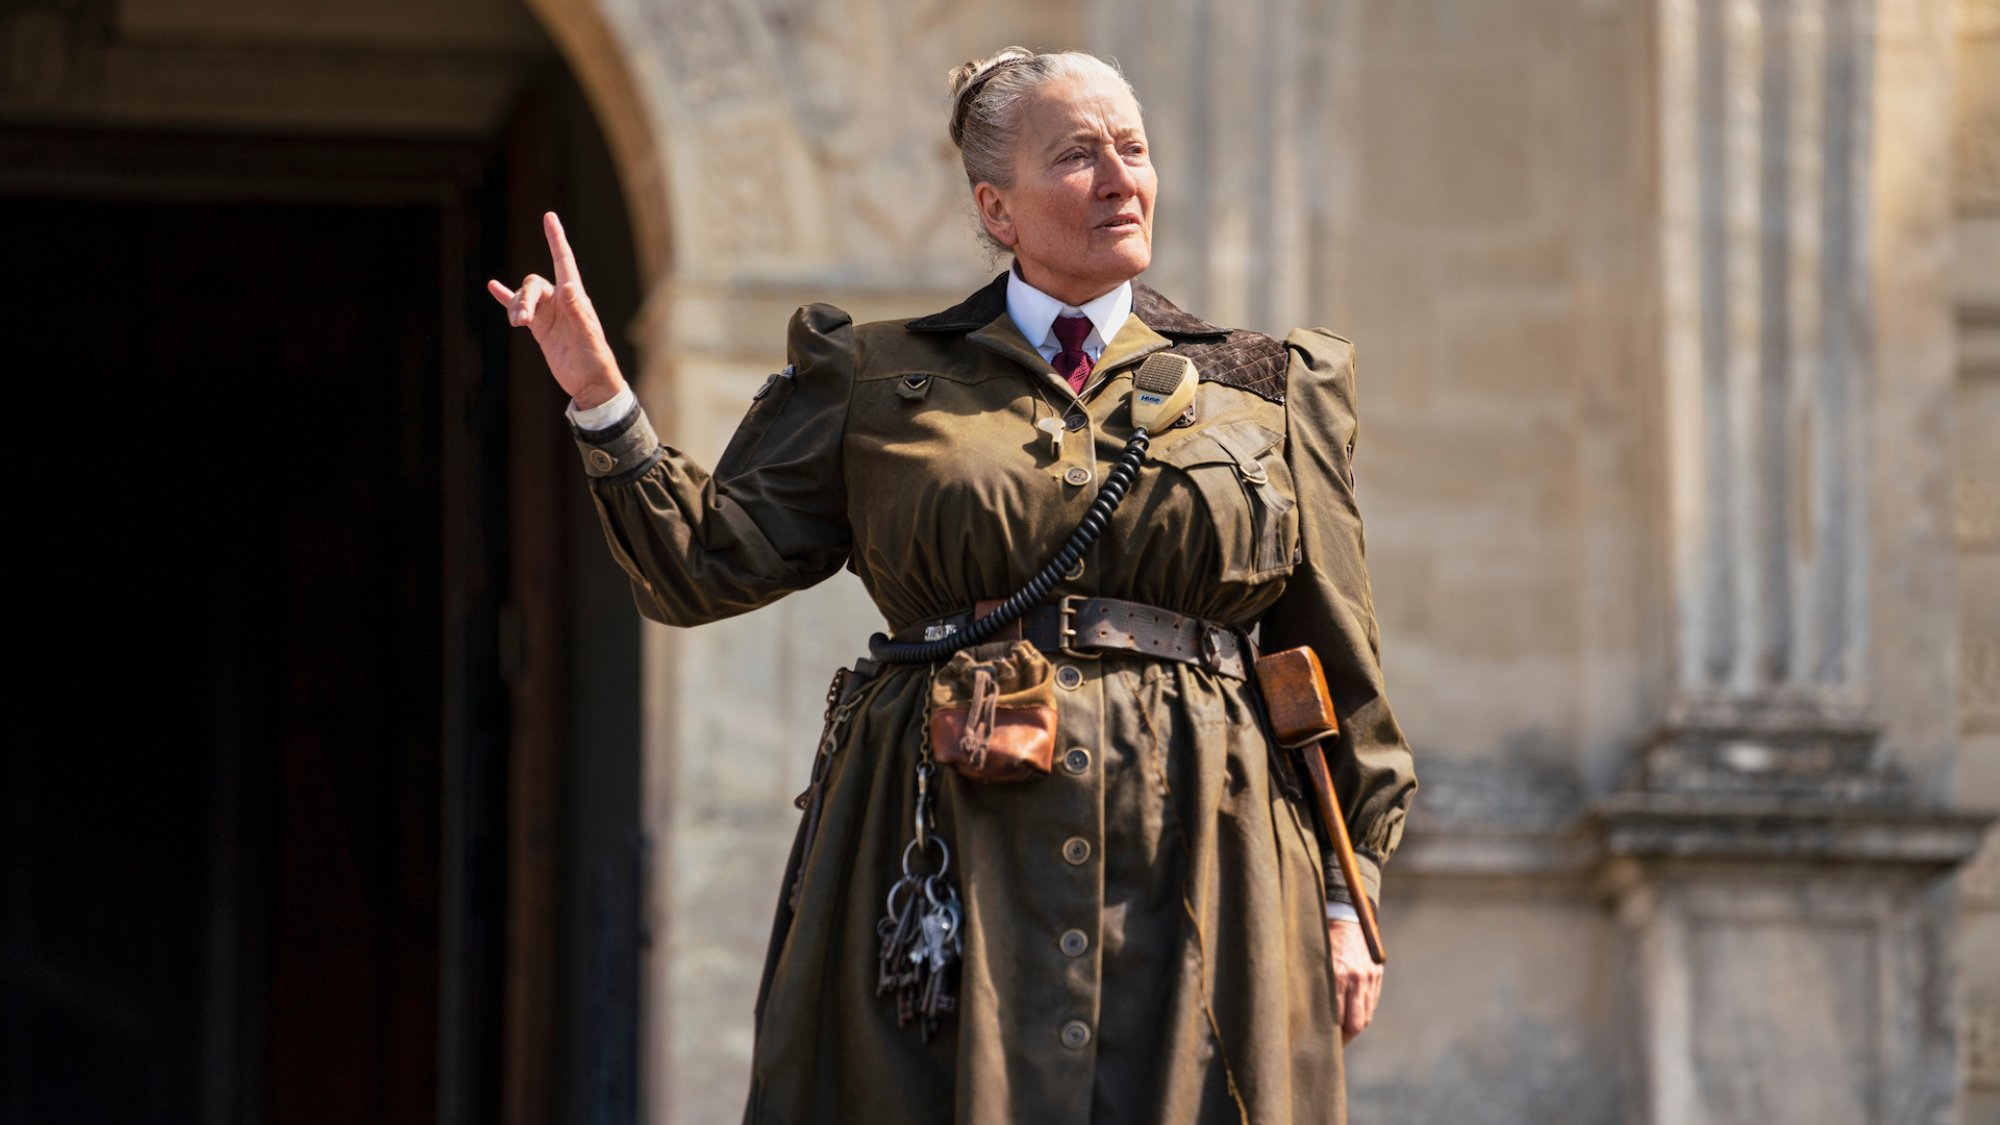 A headmistress wearing a military-style uniform raises a pointed finger.